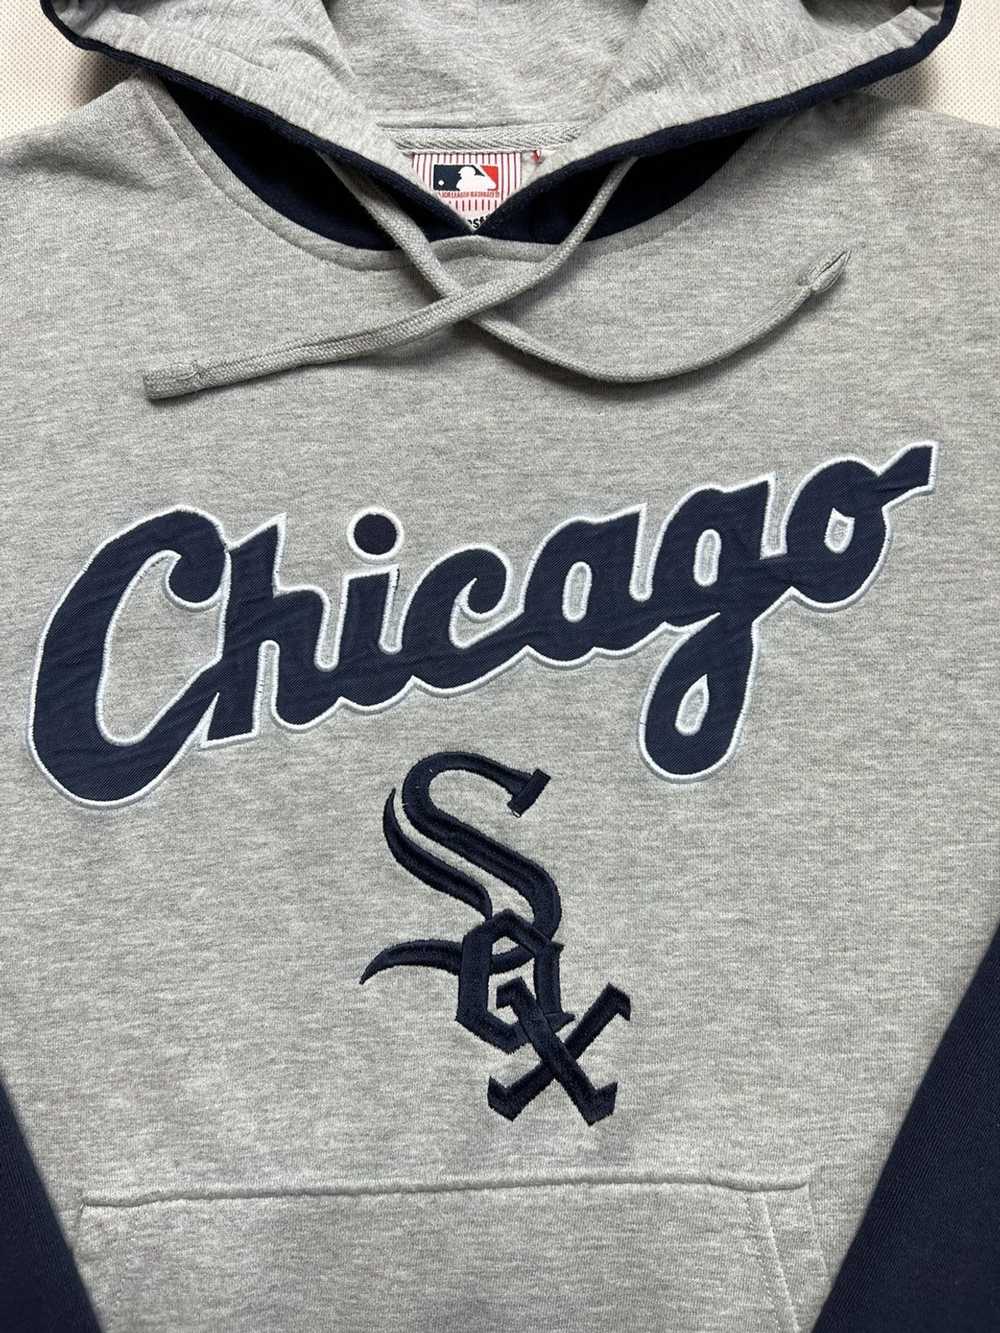 mulletguythriftscore Vintage 90s MLB Chicago White Sox Sweatshirt Crewneck by Majestic Front Sox Spellout Patches Sewn Fits Medium Adult